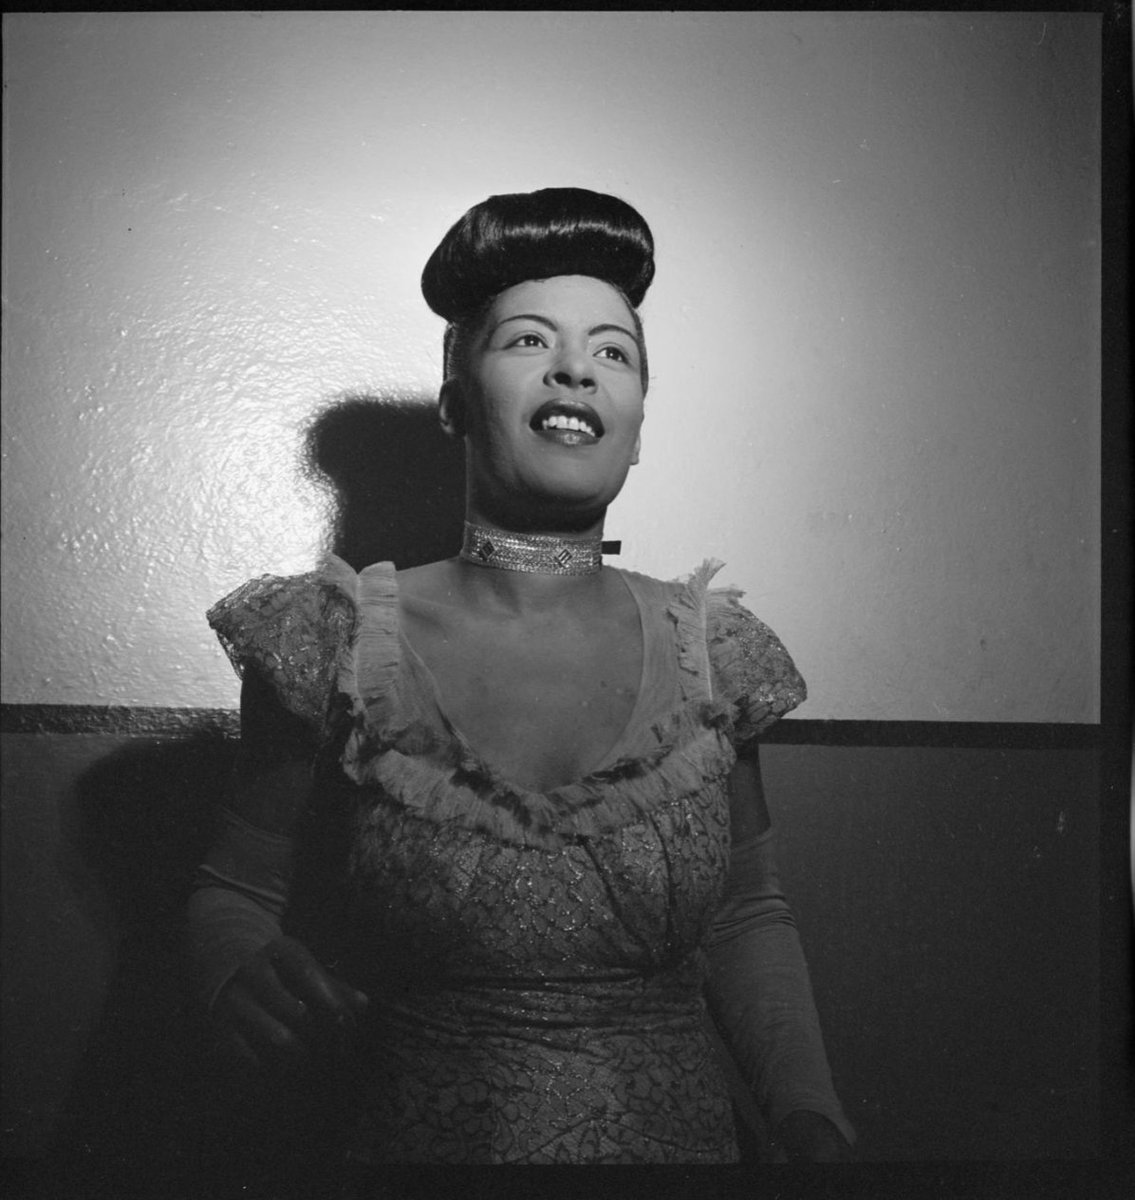 We head to @carnegiehall for @BillieHolidayHQ live in 1956. Here's a photo of Billie backstage at Carnegie Hall in 1948. #jazz #radio